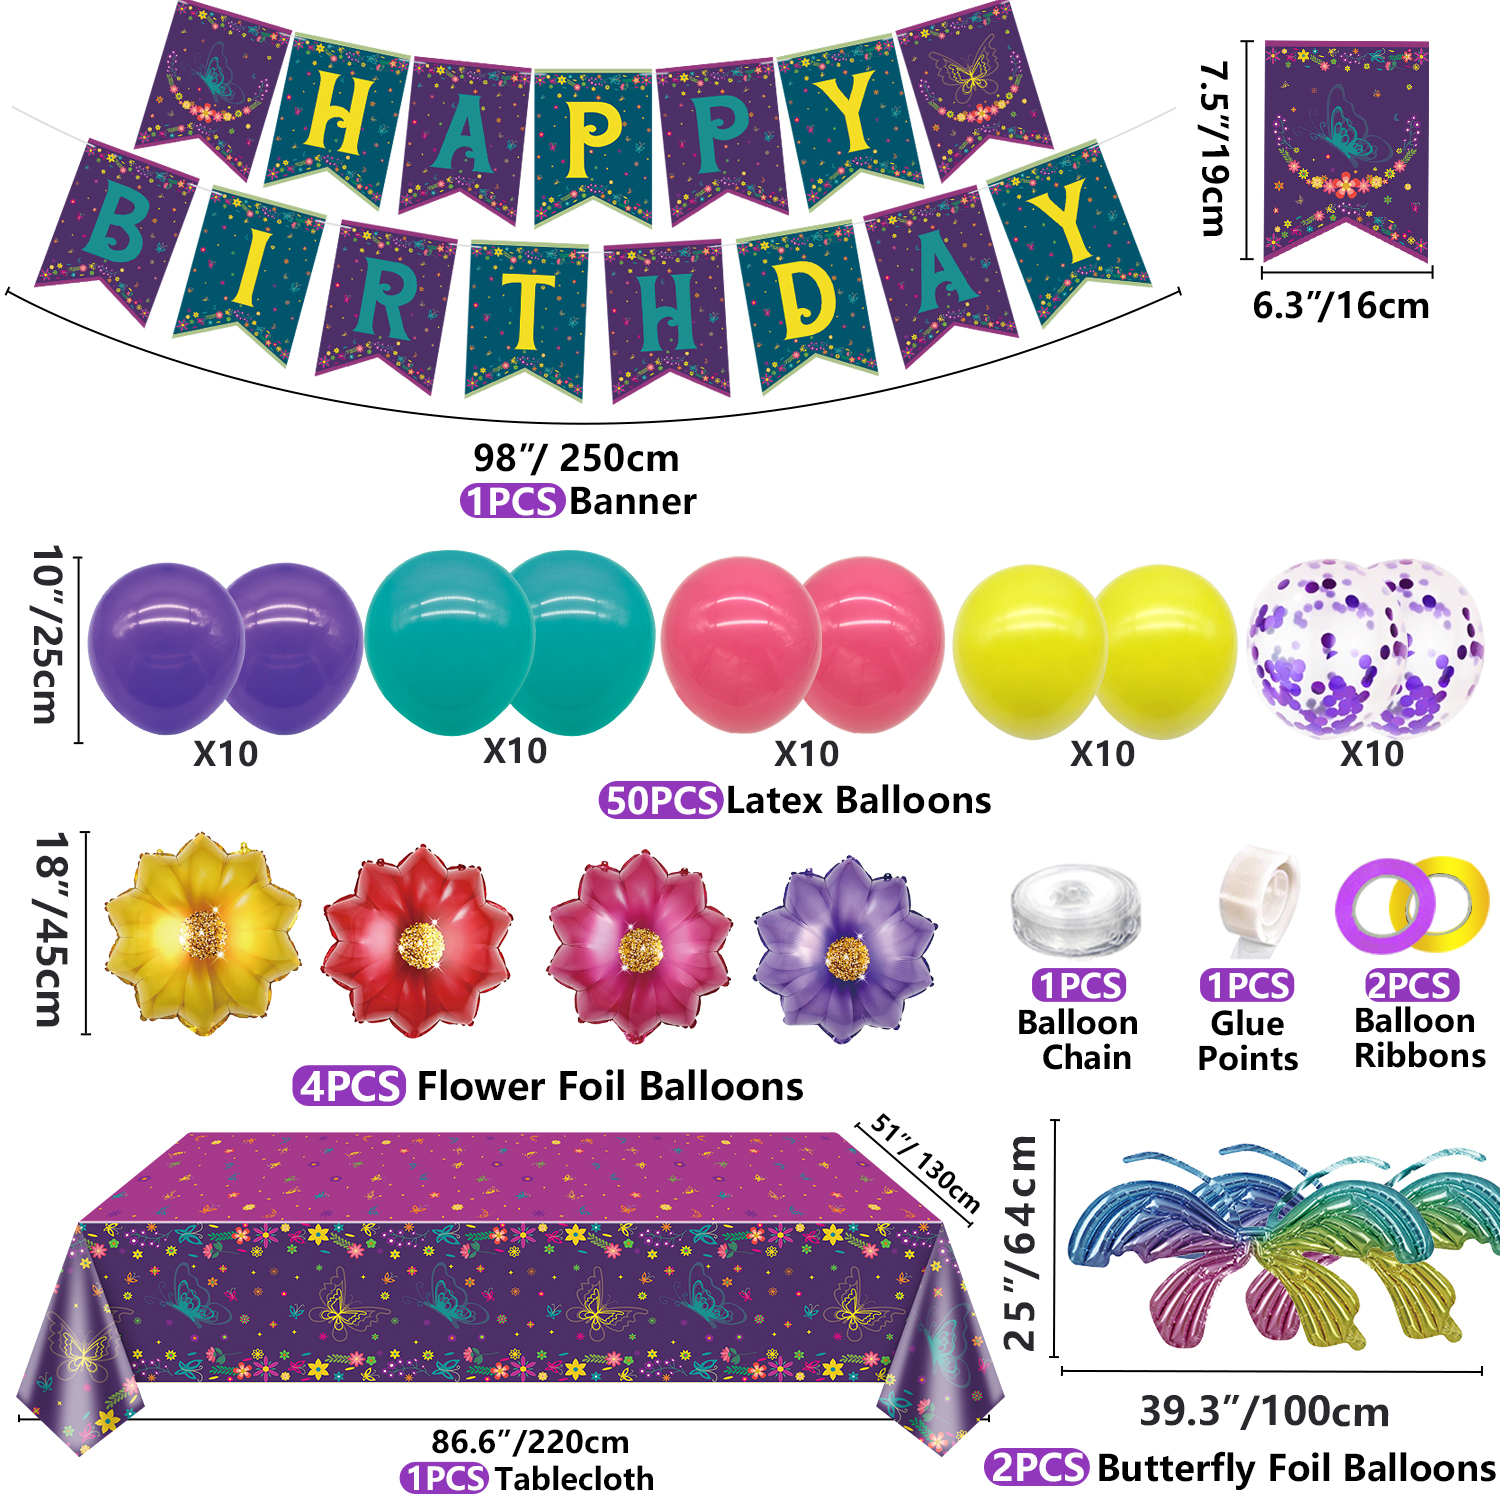 255 Pcs Movie Butterfly Birthday Decorations - Plates, Tablecloth, Balloons, Banner, Temporary Tattoos, Butterfly Stickers, Tableware, Cups, Butterfly Wing Set for Magic Party Supplies - image 3 of 8